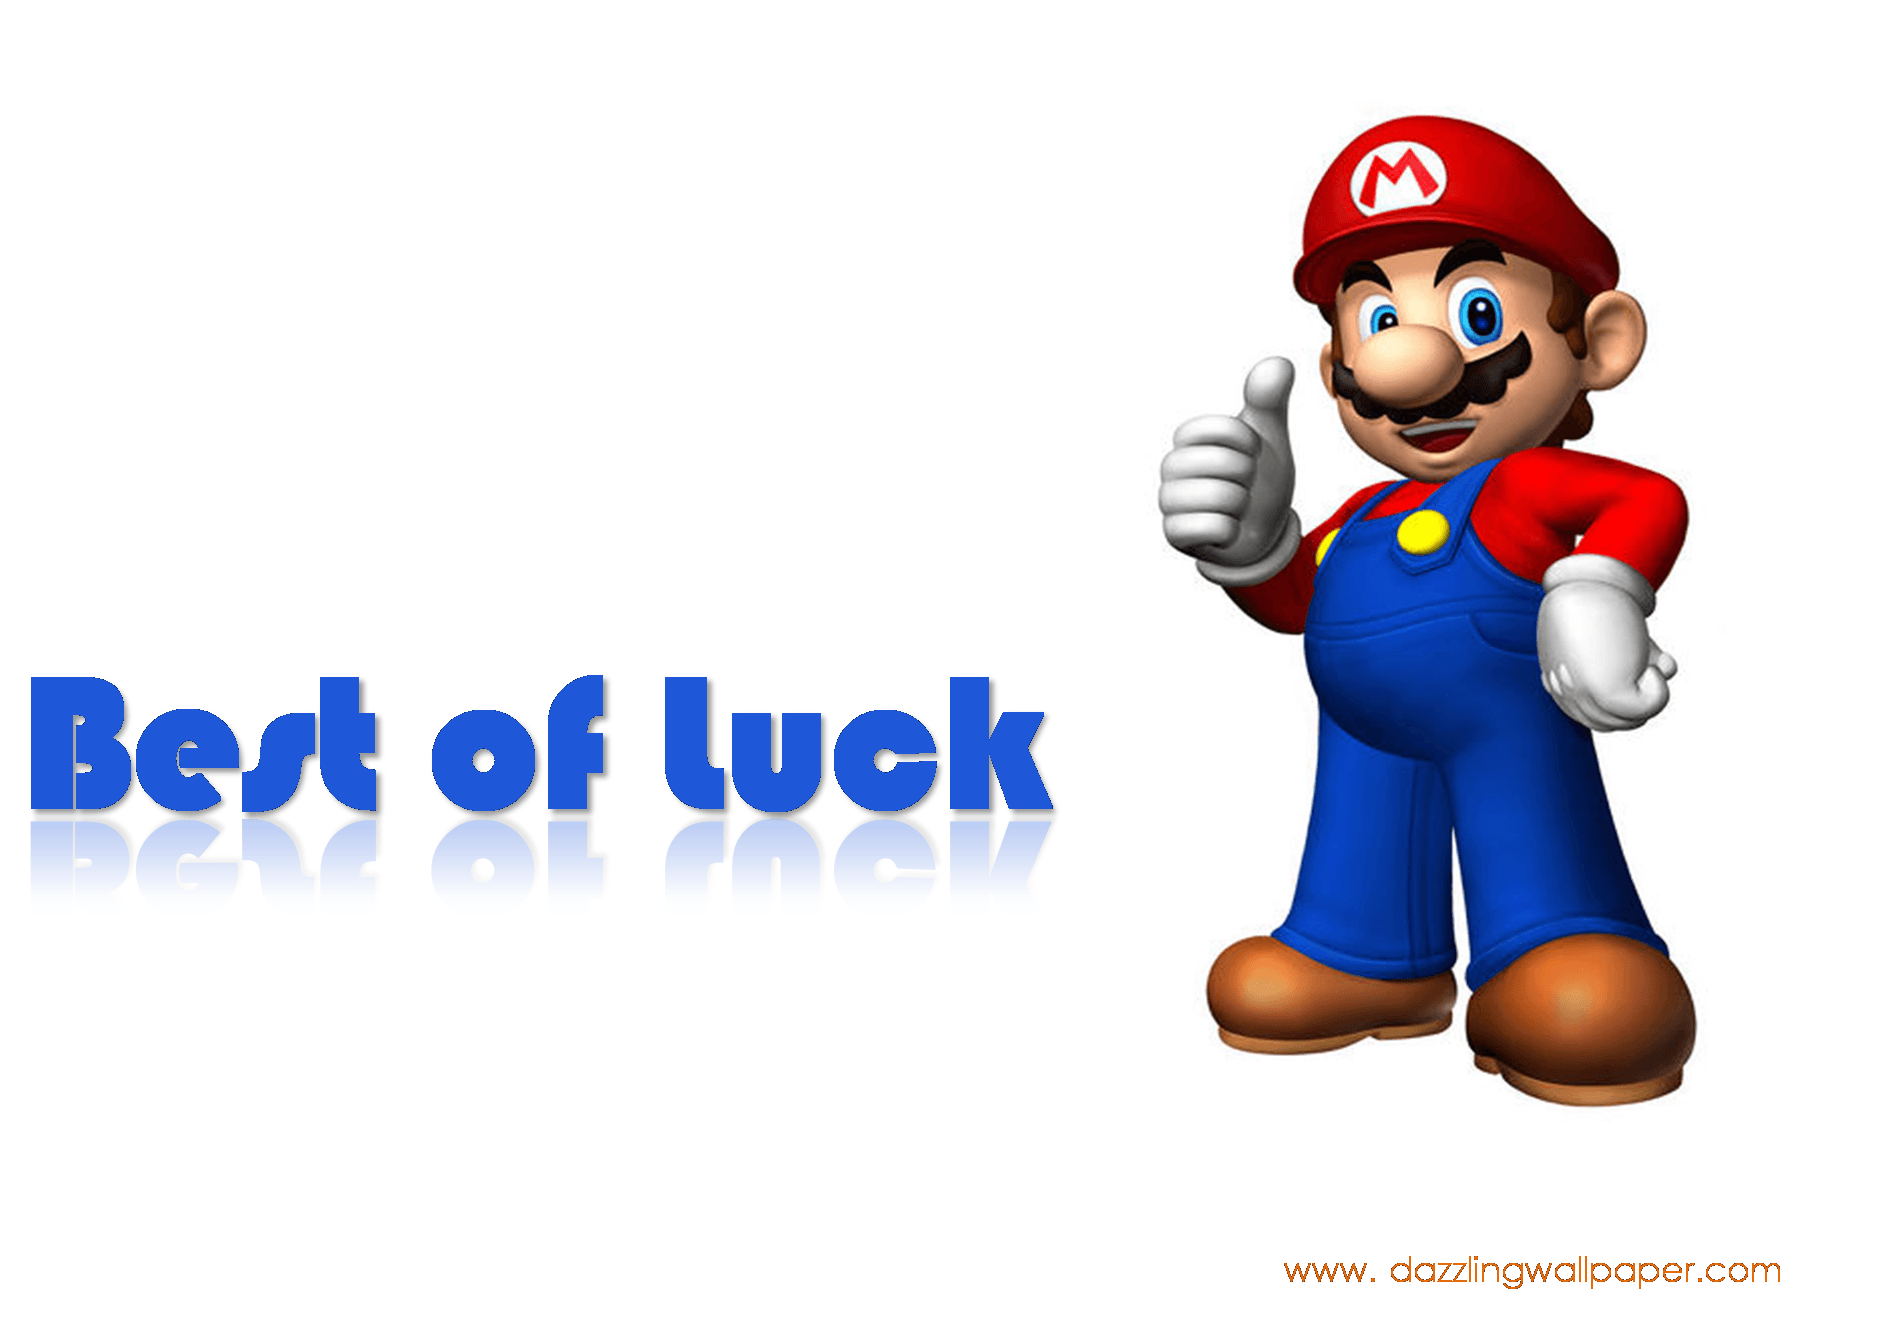 image For > Good Luck And Best Wishes Image